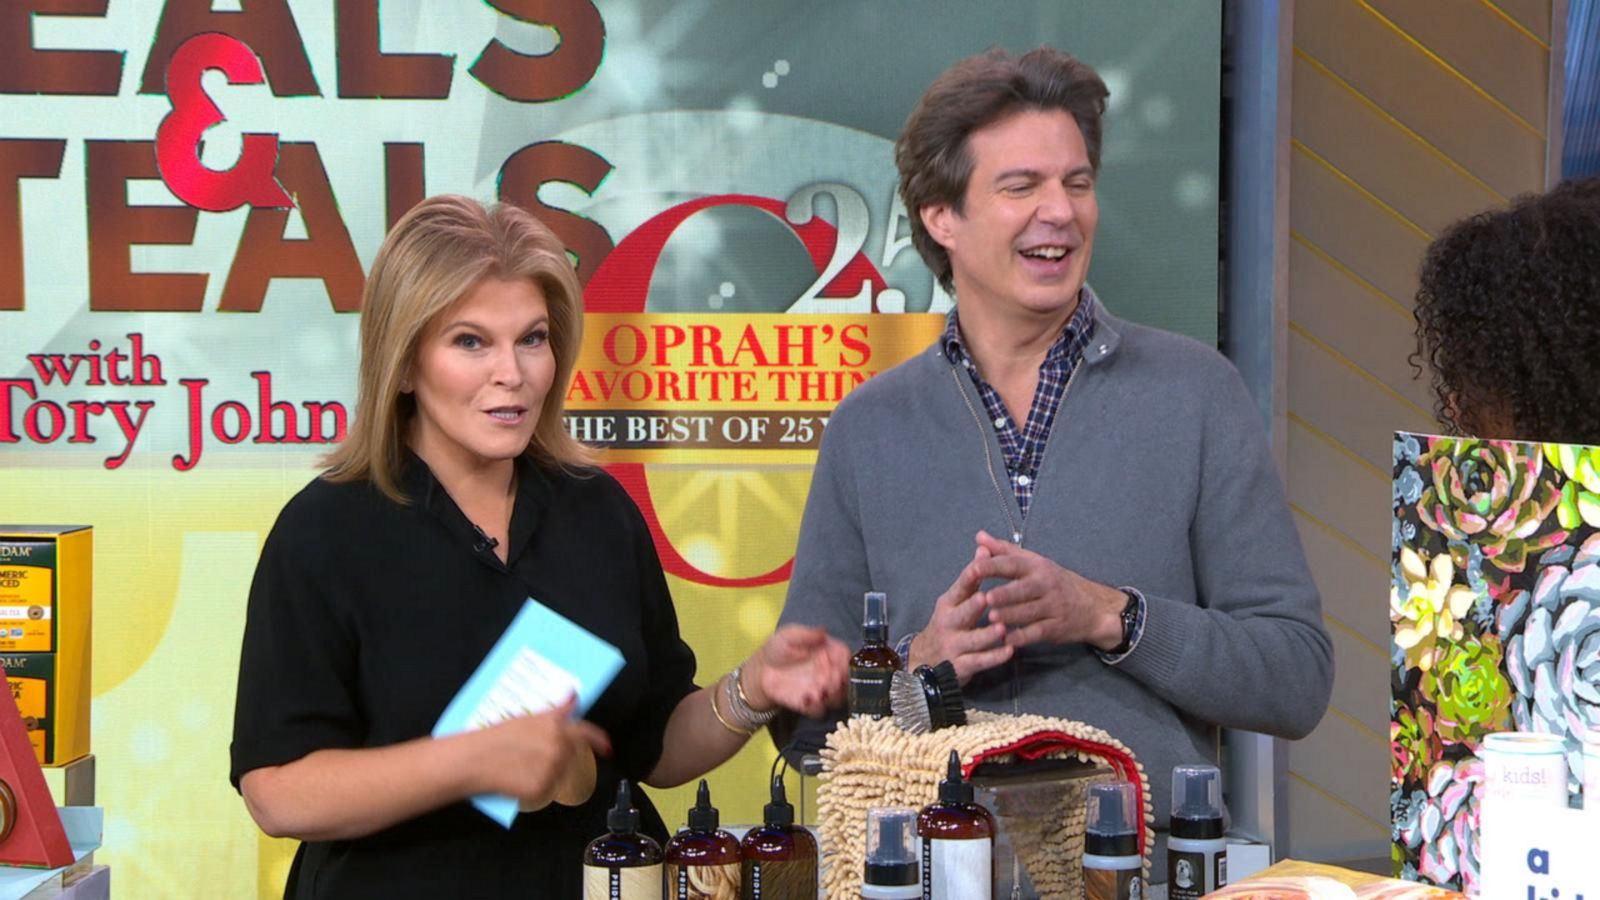 Deals and Steals featuring Oprah's favorite things Good Morning America